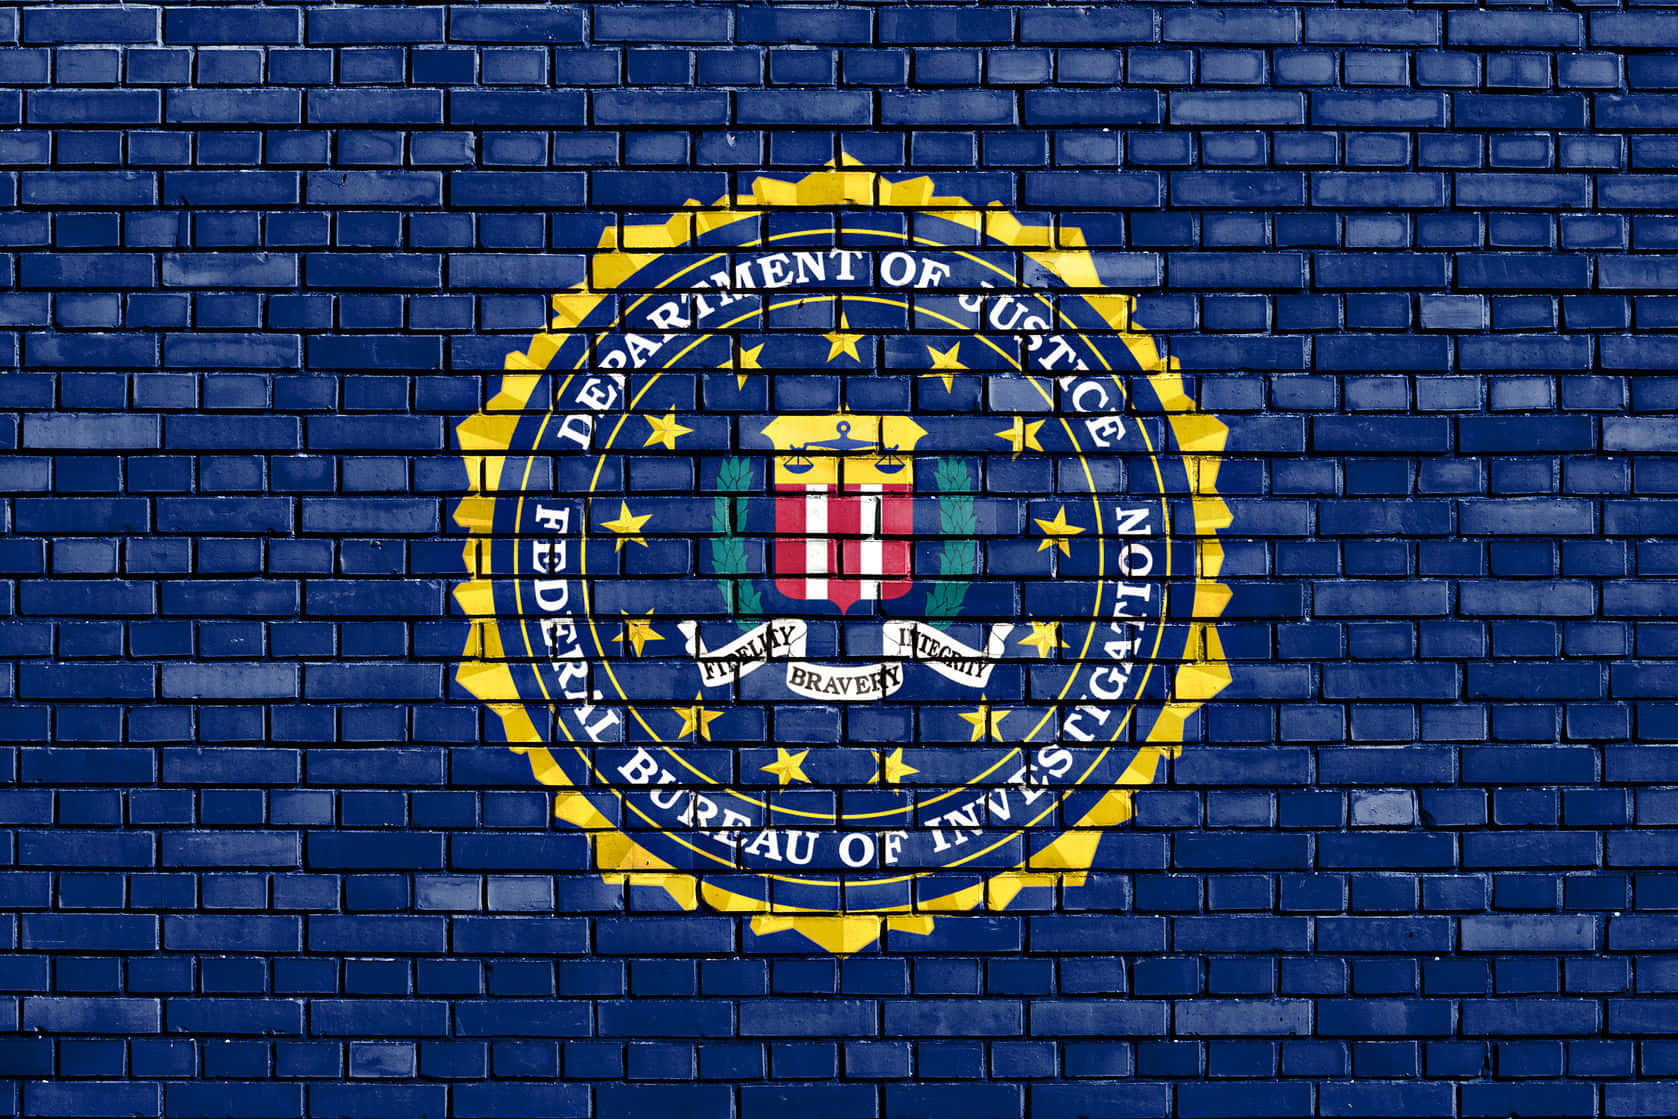 The Fbi Logo Is Painted On A Brick Wall